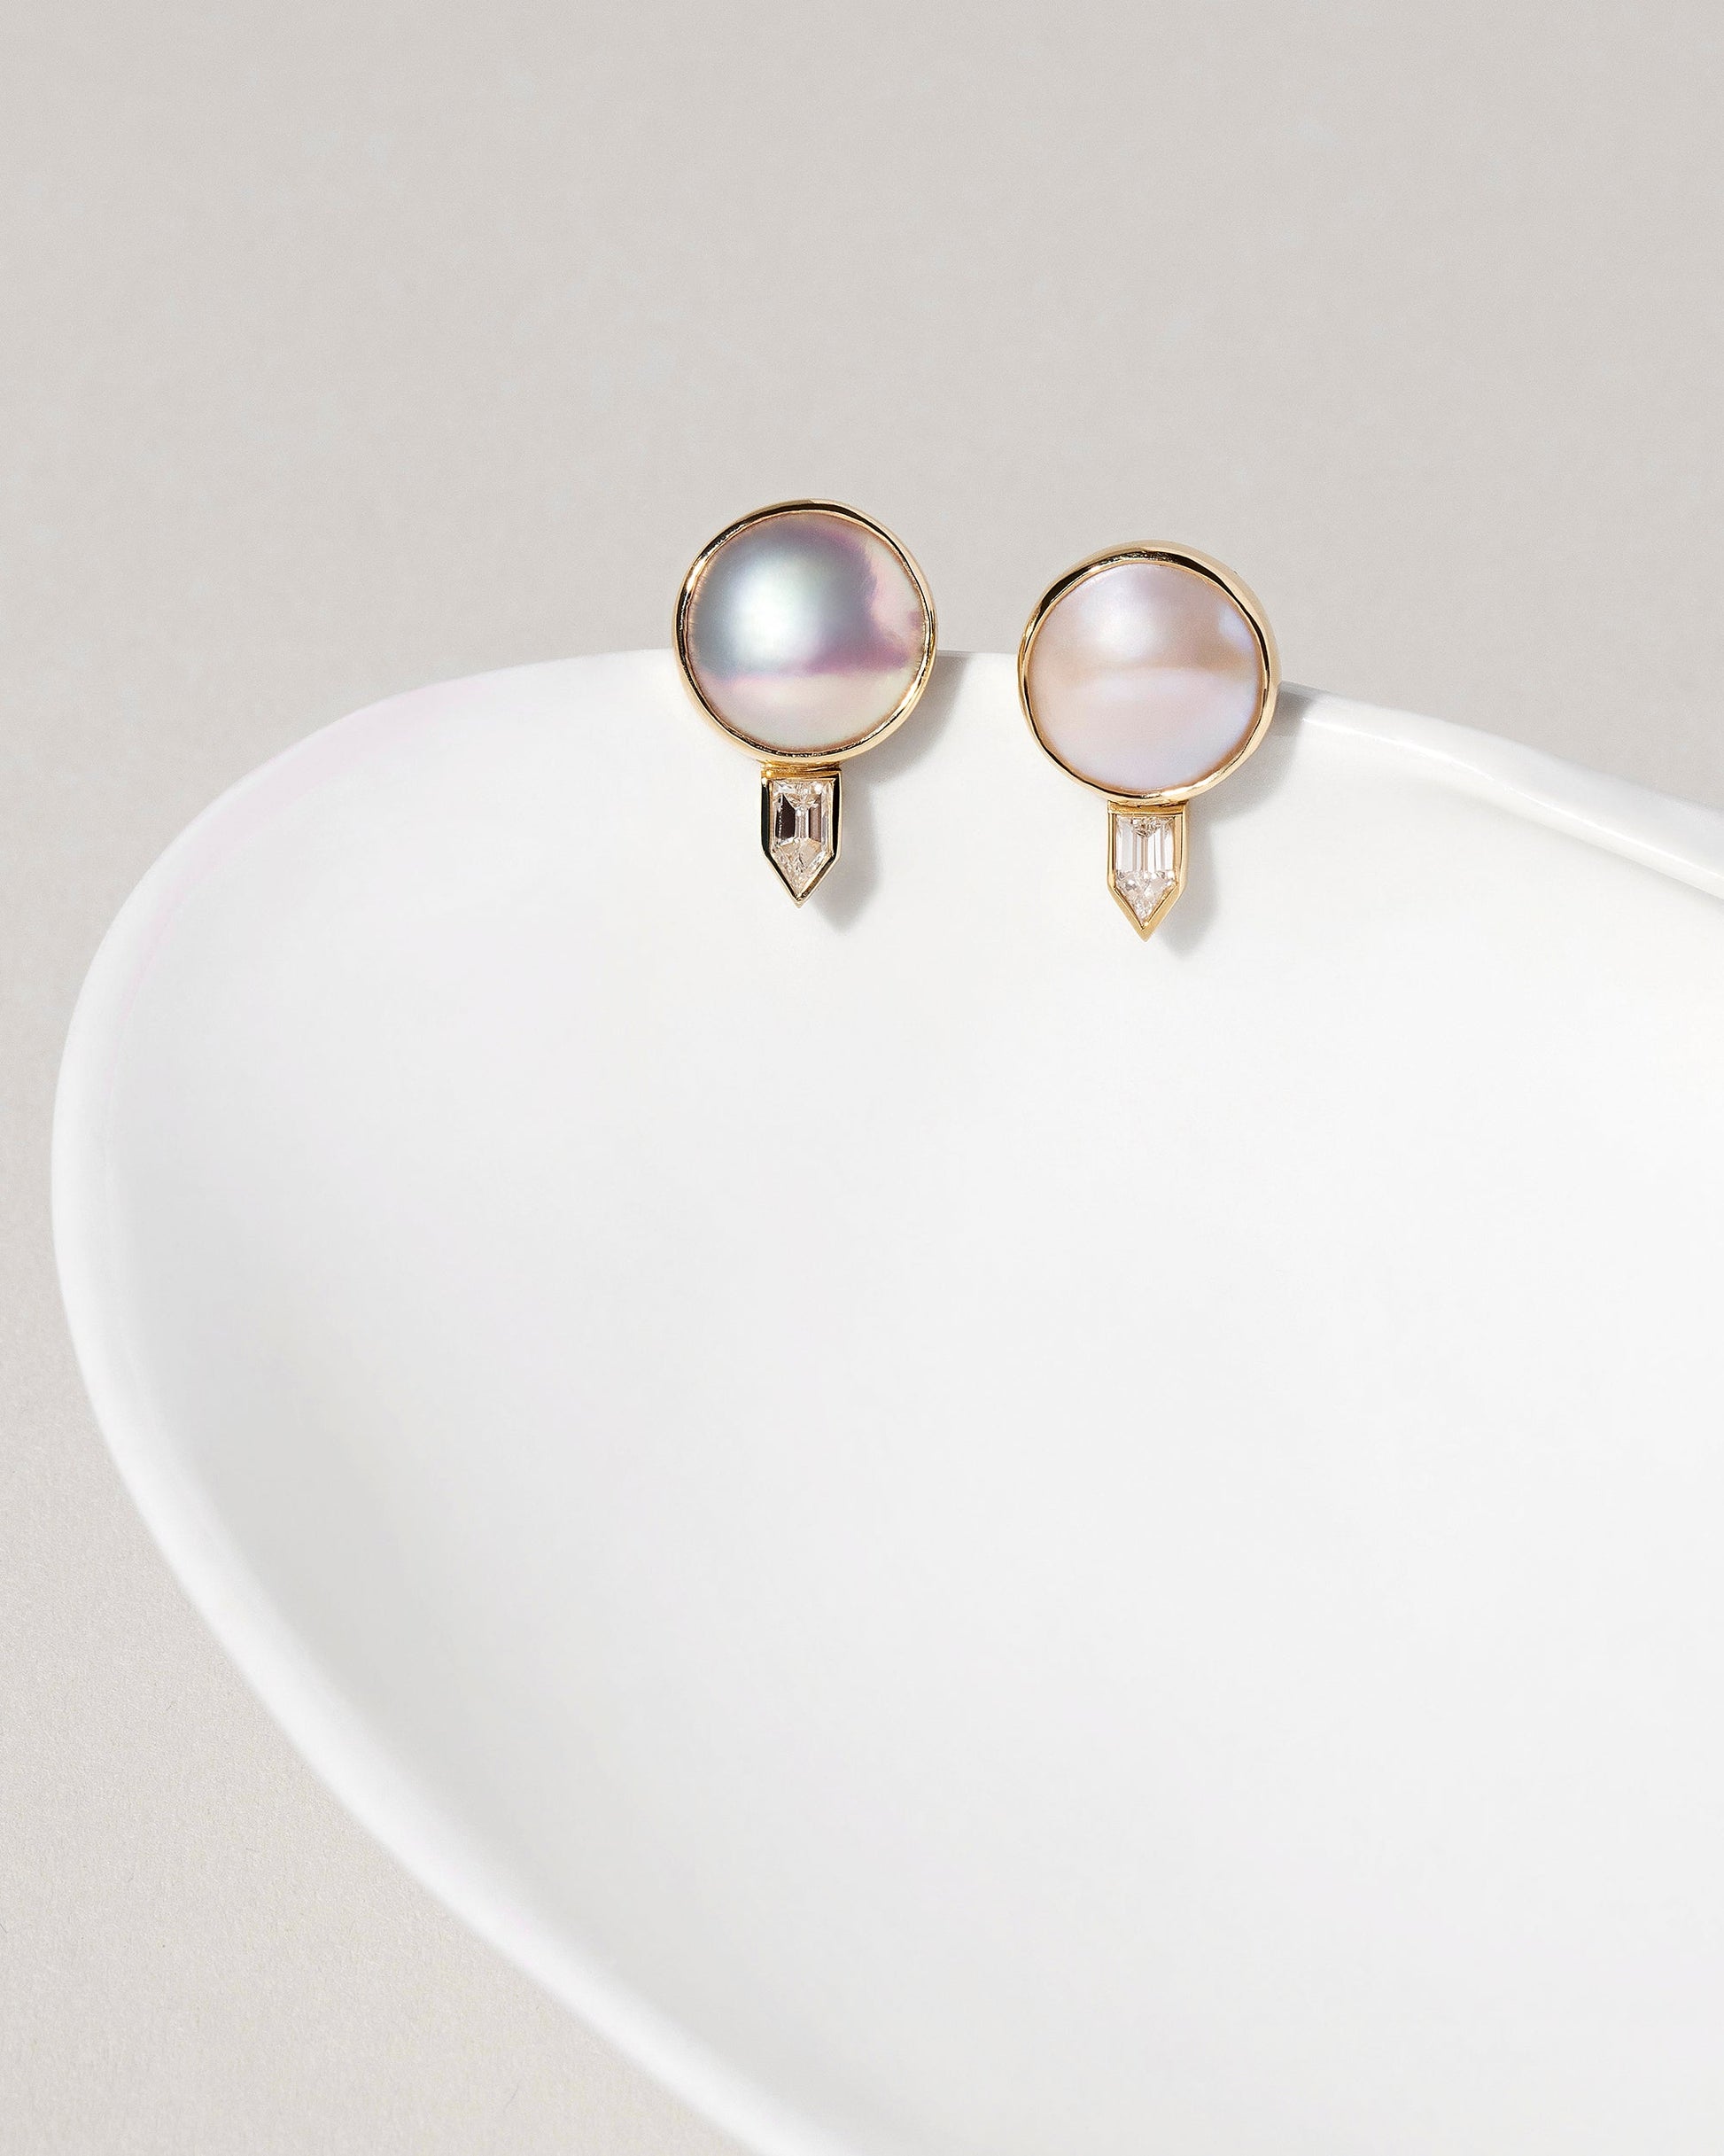  Mabe Pearl & Diamond Earrings on light color background.